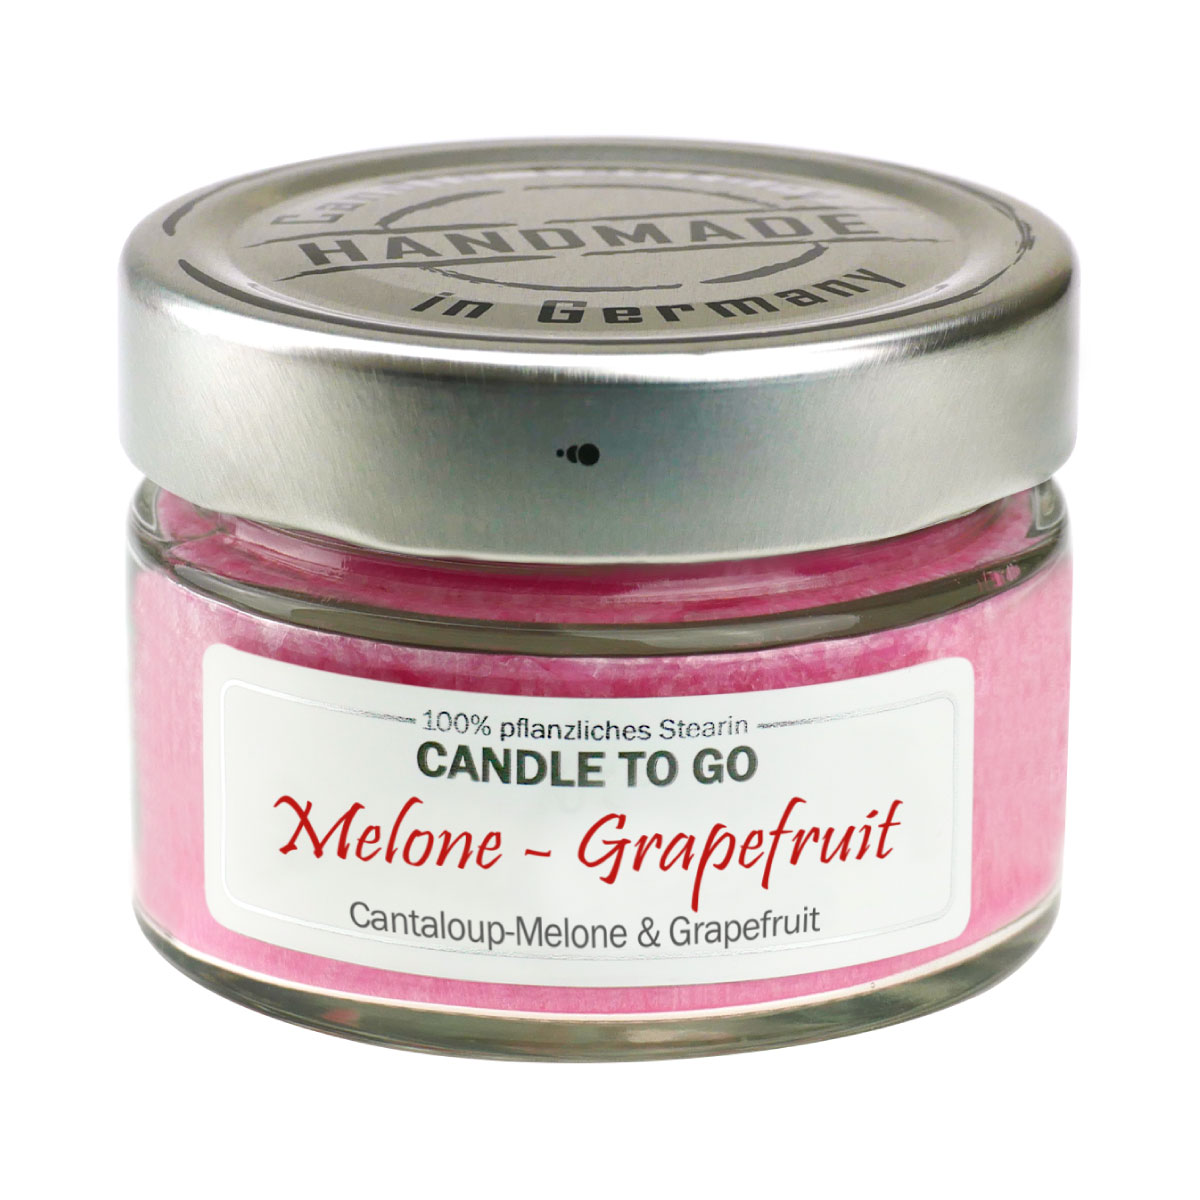 Melone Grapefruit - Candle to Go Duftkerze von Candle Factory